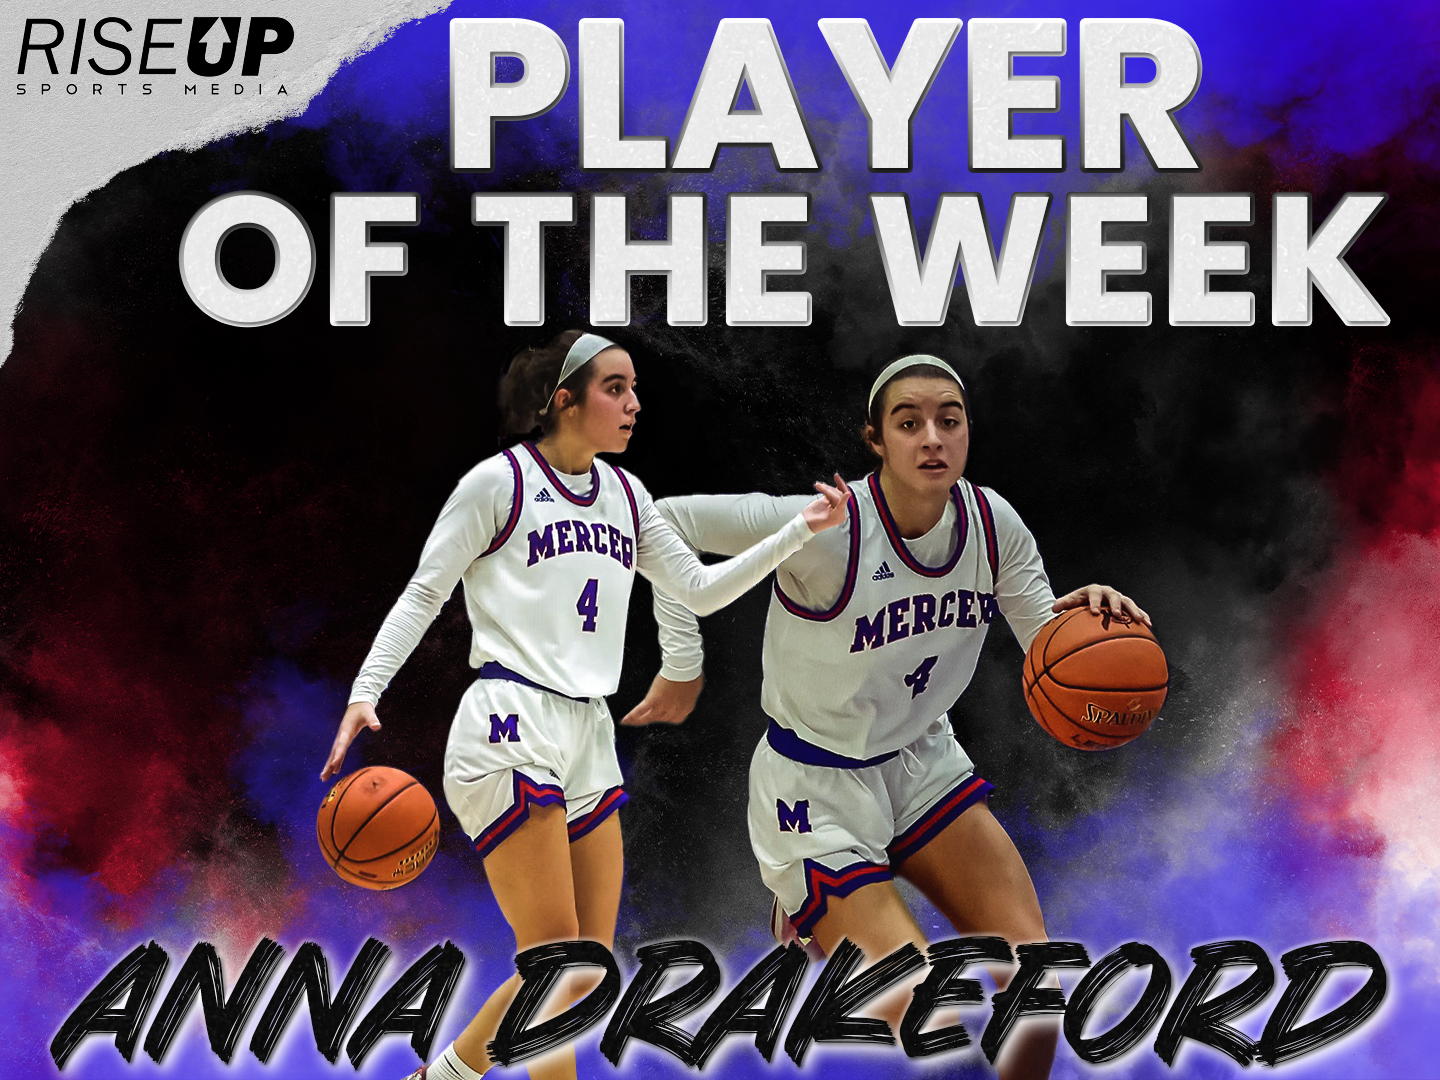 Rise Up Player of the Week: Anna Drakeford